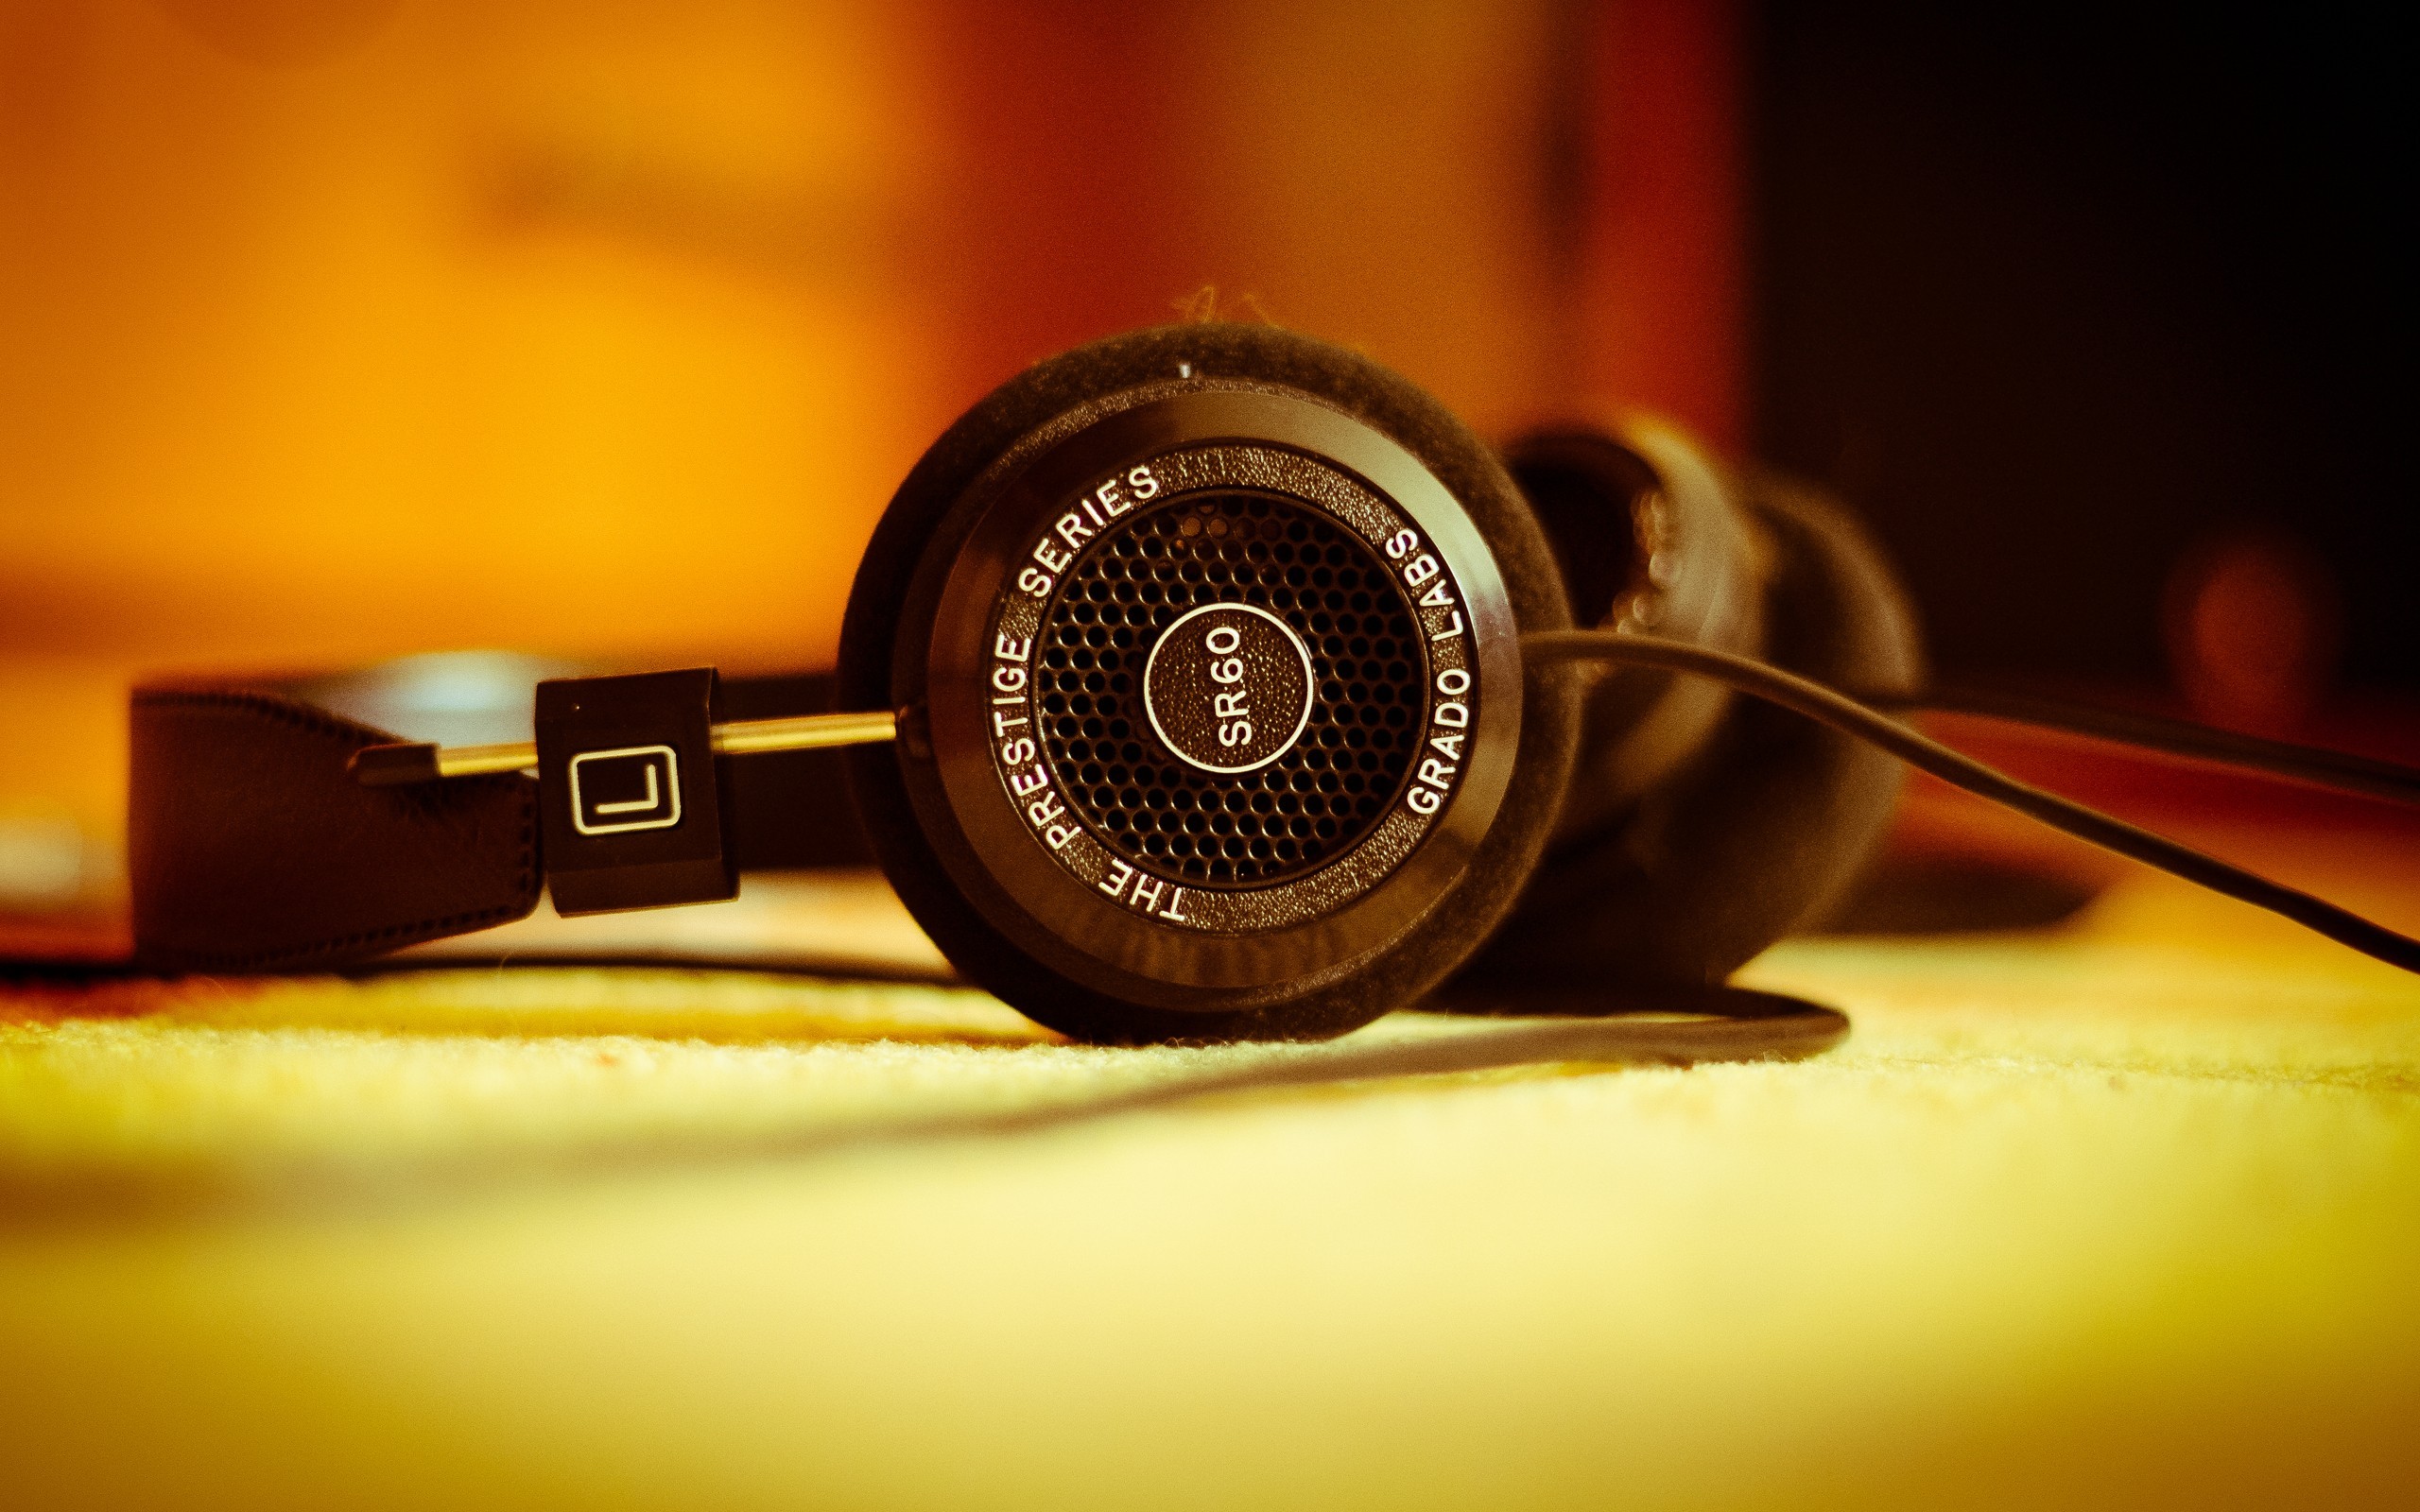 Top 5 Headphones To Listen Music While Using Social Media